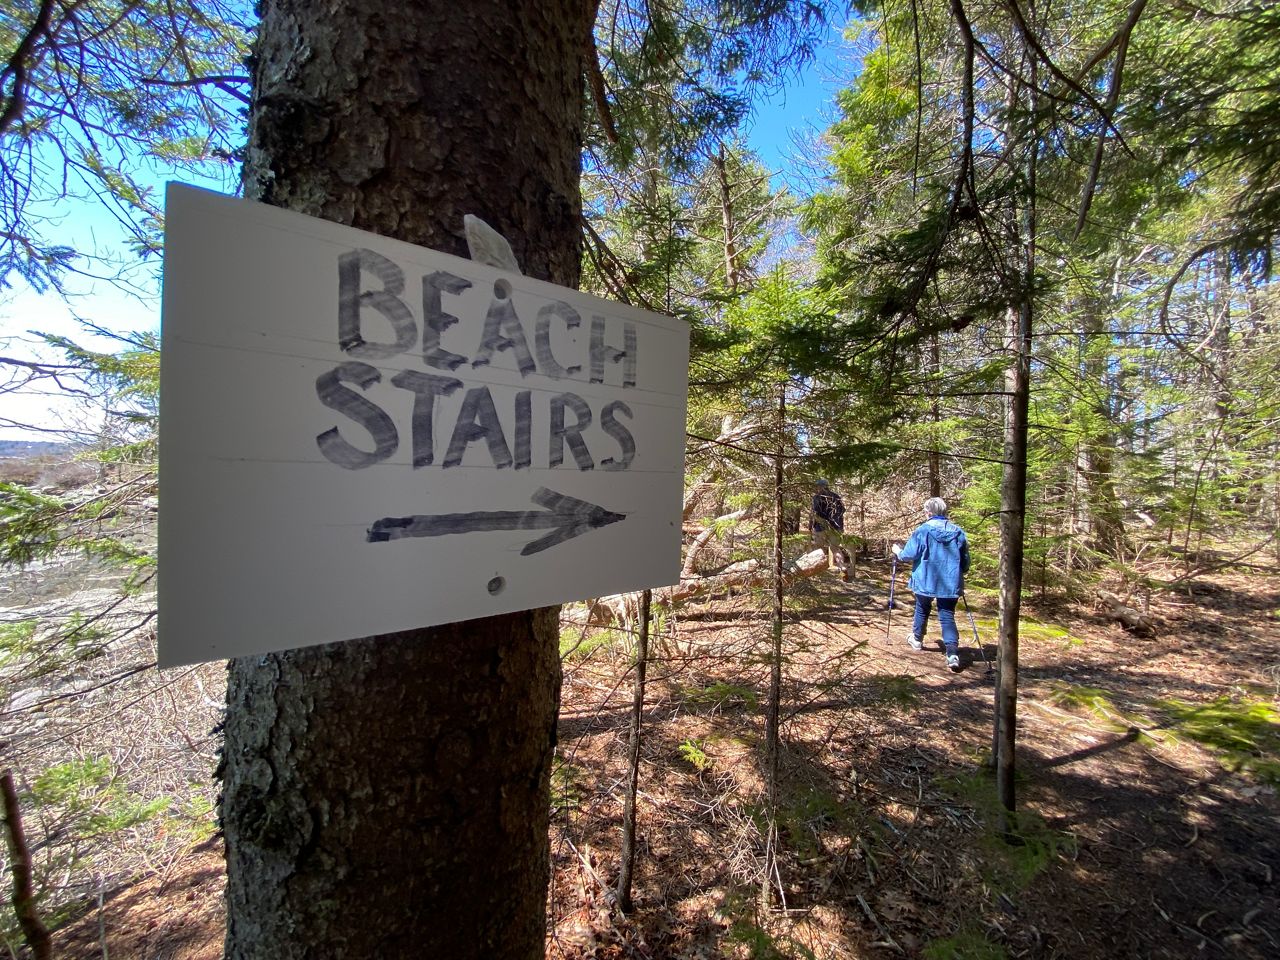 The Porter Preserve in Boothbay features an easy 1.1-mile trail through the woods and offers scenic ocean views. (Photo by Susan Cover/Spectrum News Maine).